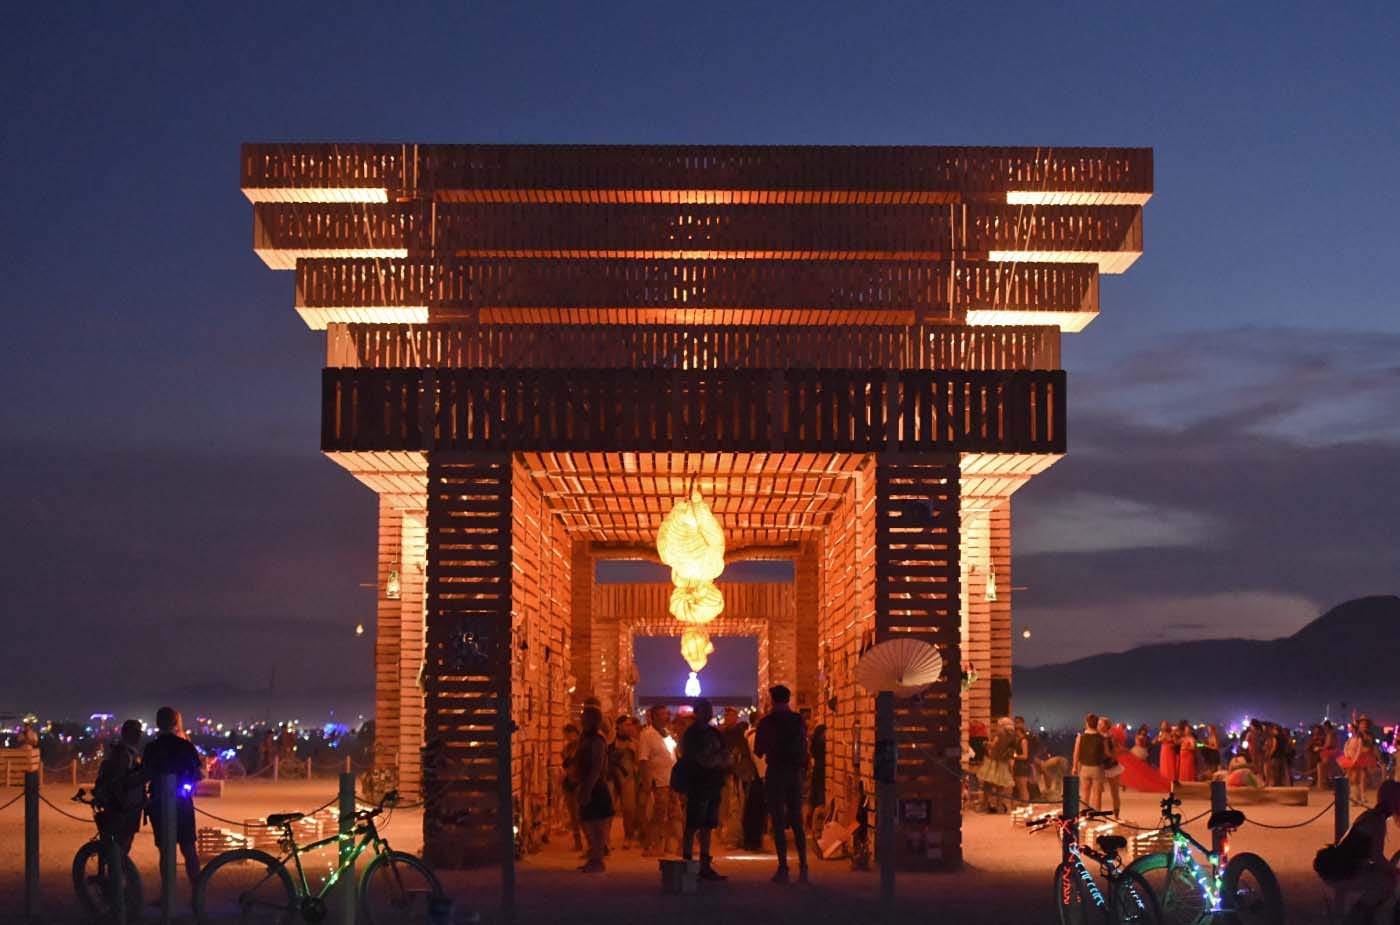 Burning Man Blm Haven T Provided Emergency Plan In Case Of Shooter